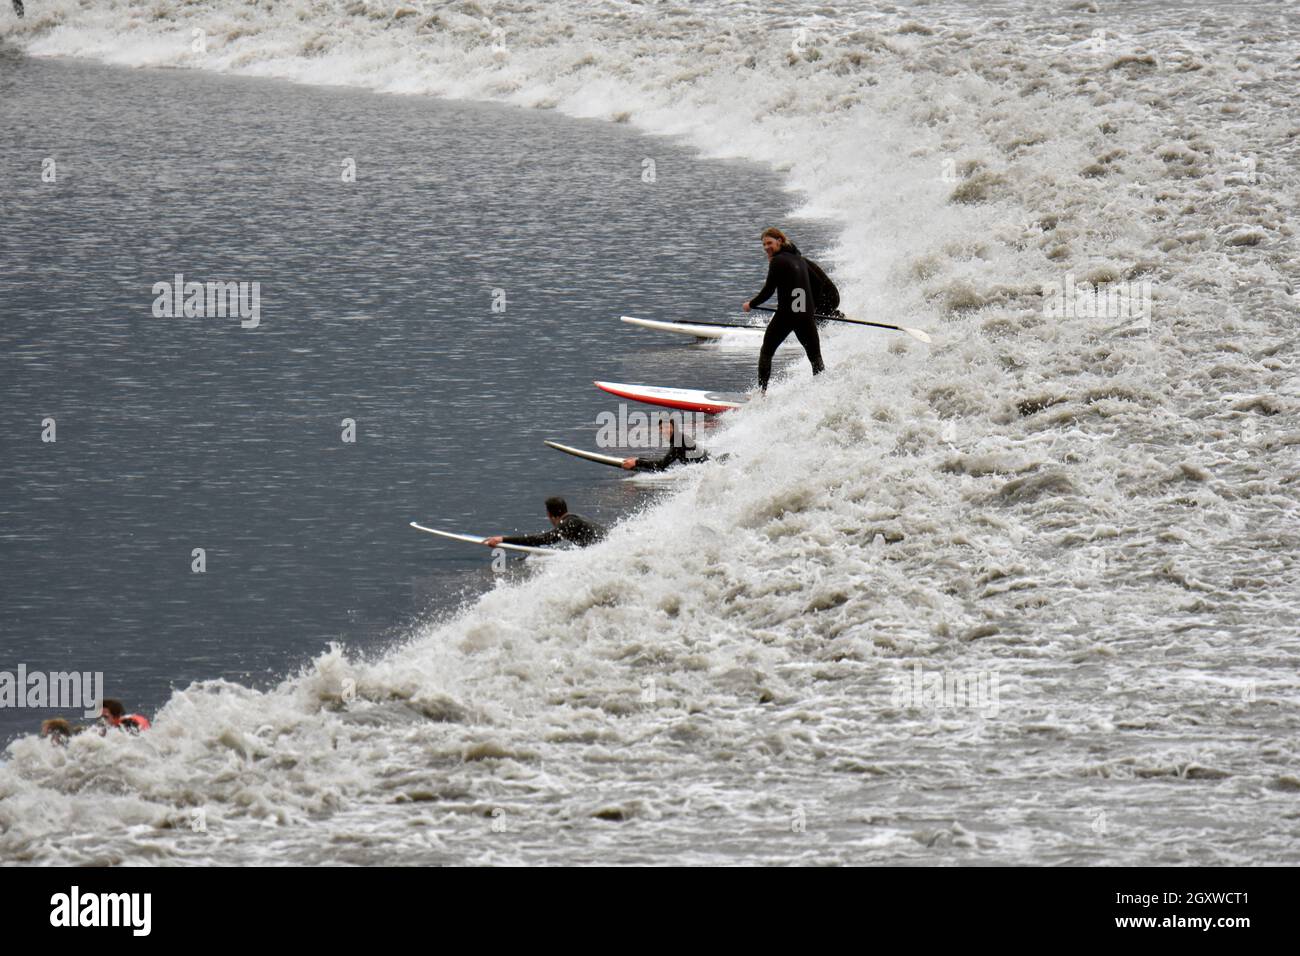 Cold water surfers ride a bore tide wave in the Turnagain Arm of the Cook Inlet, Anchorage, Alaska, USA Stock Photo